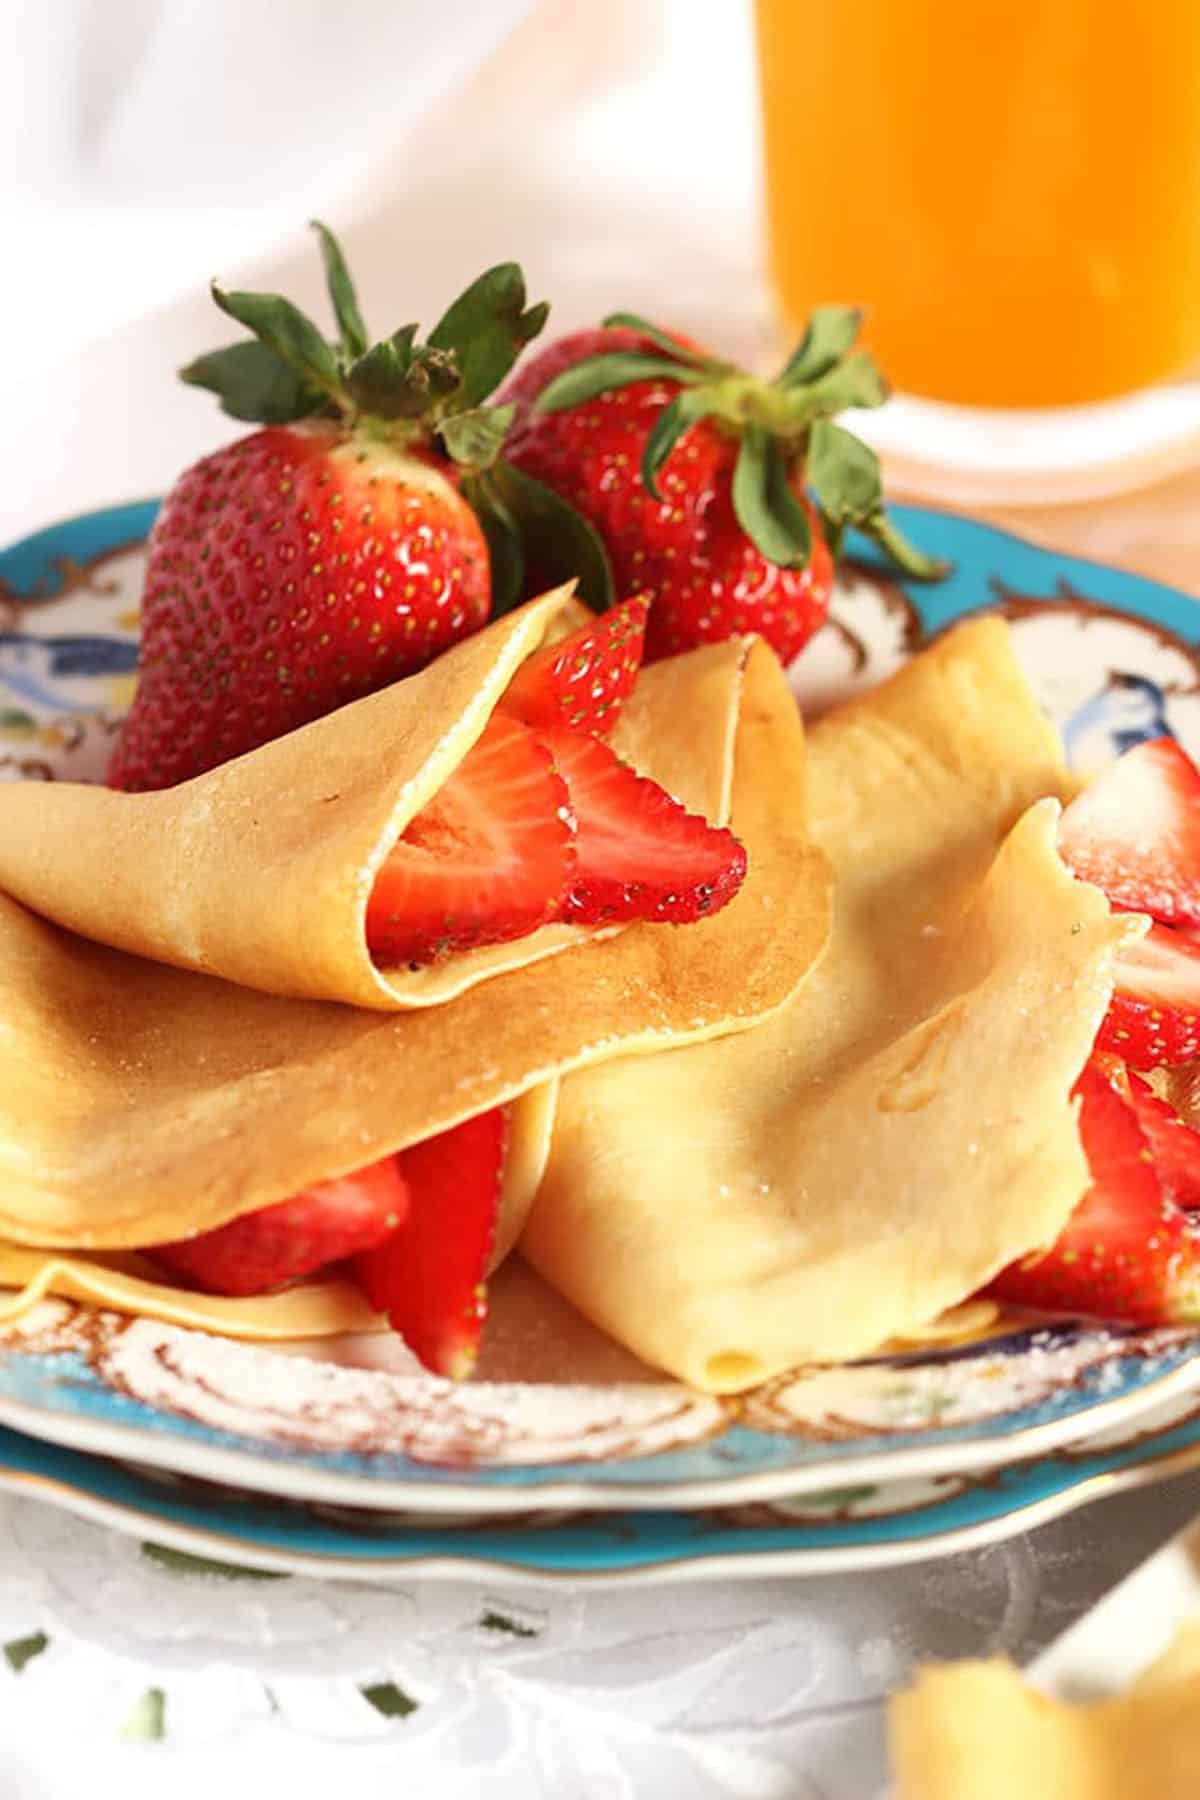 French Crepes stuffed with sliced strawberries on a blue and white plate.